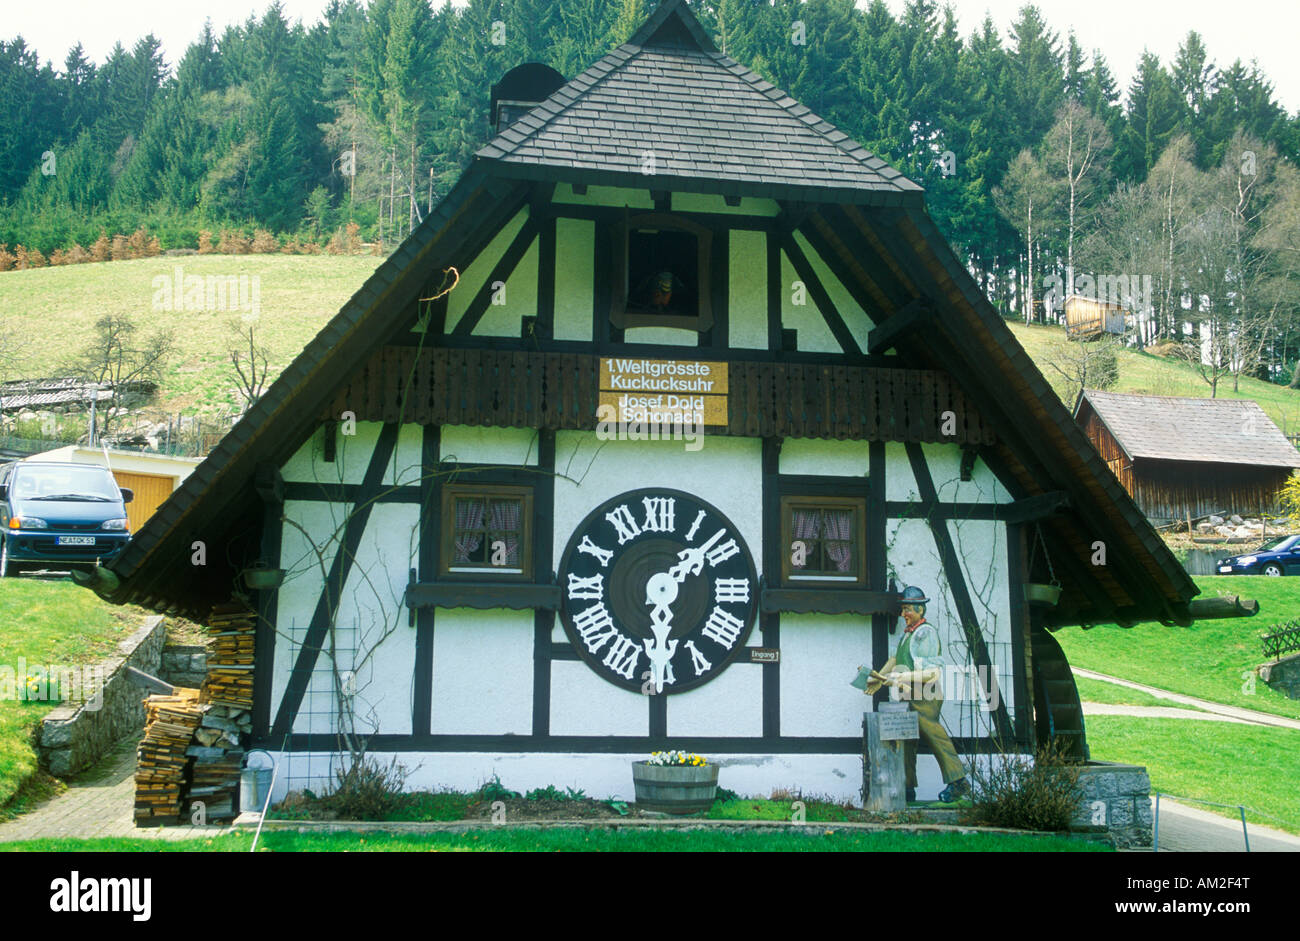 one of the biggest cuckoo clocks in the world can be seen near the town of Triberg in the Black Forest in Germany Stock Photo